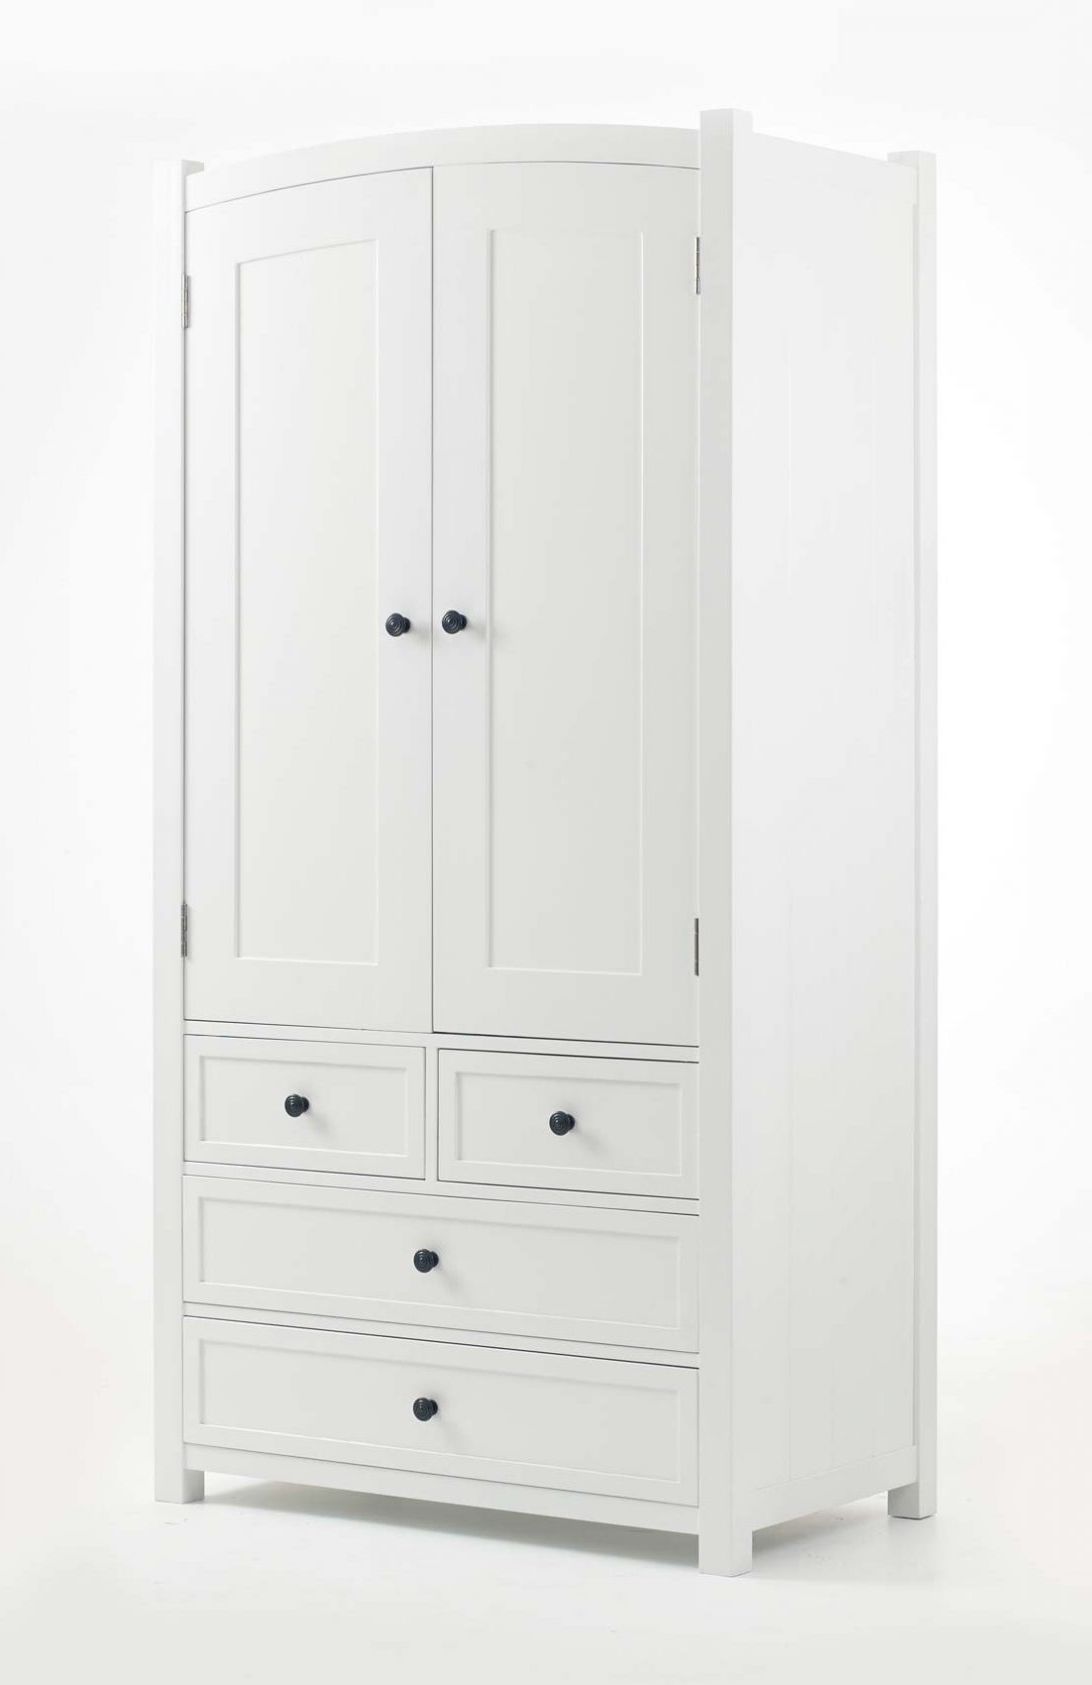 Newest White Wood Wardrobes With Drawers Pertaining To White Wardrobe With Drawers And Shelves Sliding Door Wood (View 5 of 15)